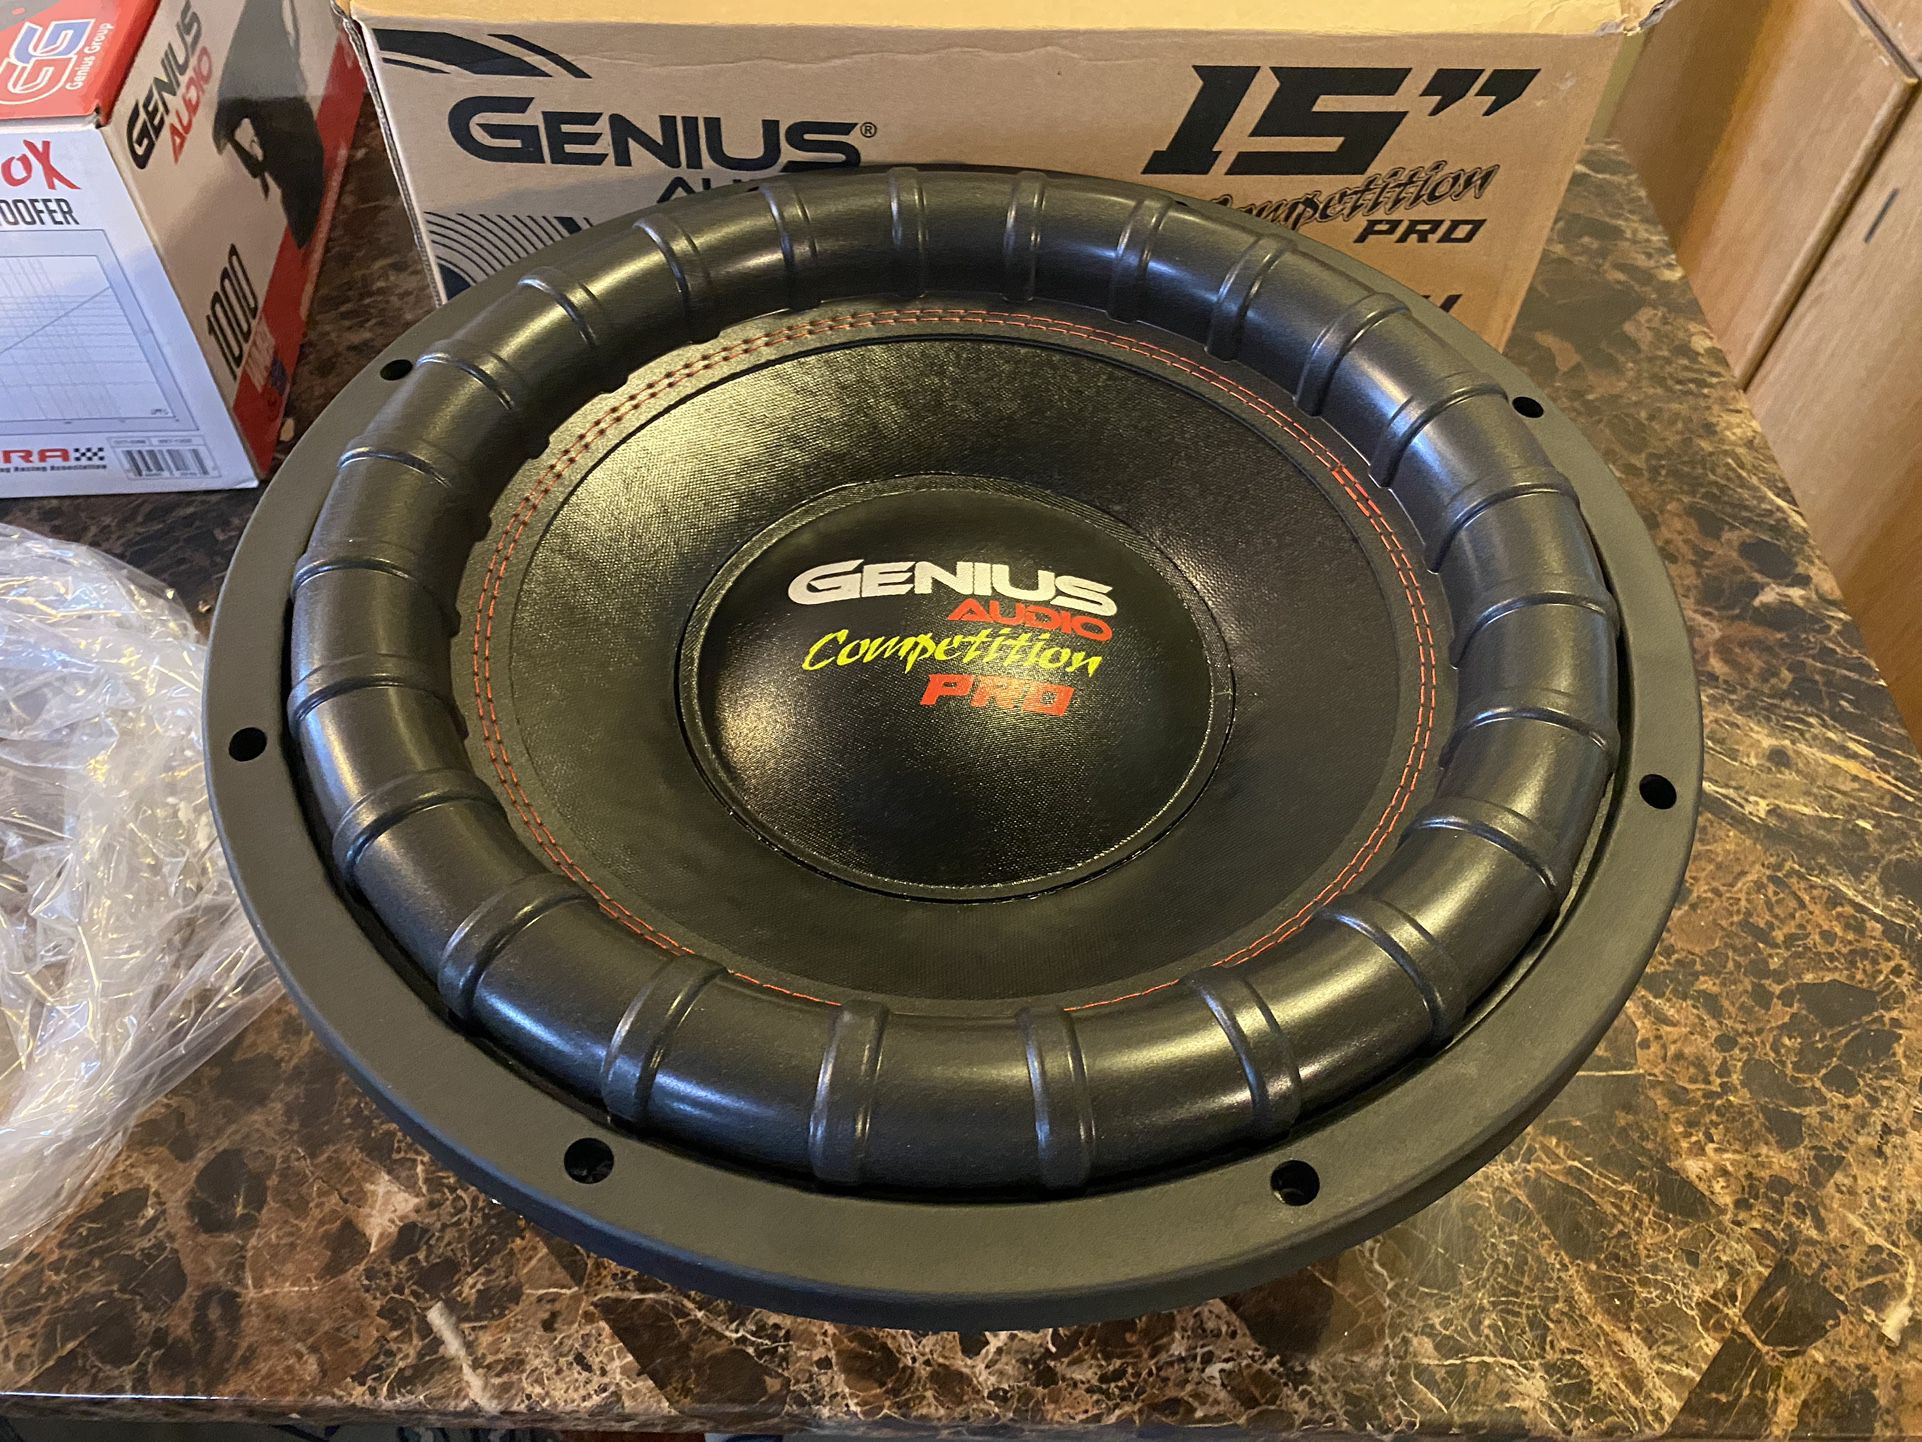 Sold Out New 15” Genius Audio 2000w Max Power Dual 4 Ohm Subwoofer  ( 1 Available)